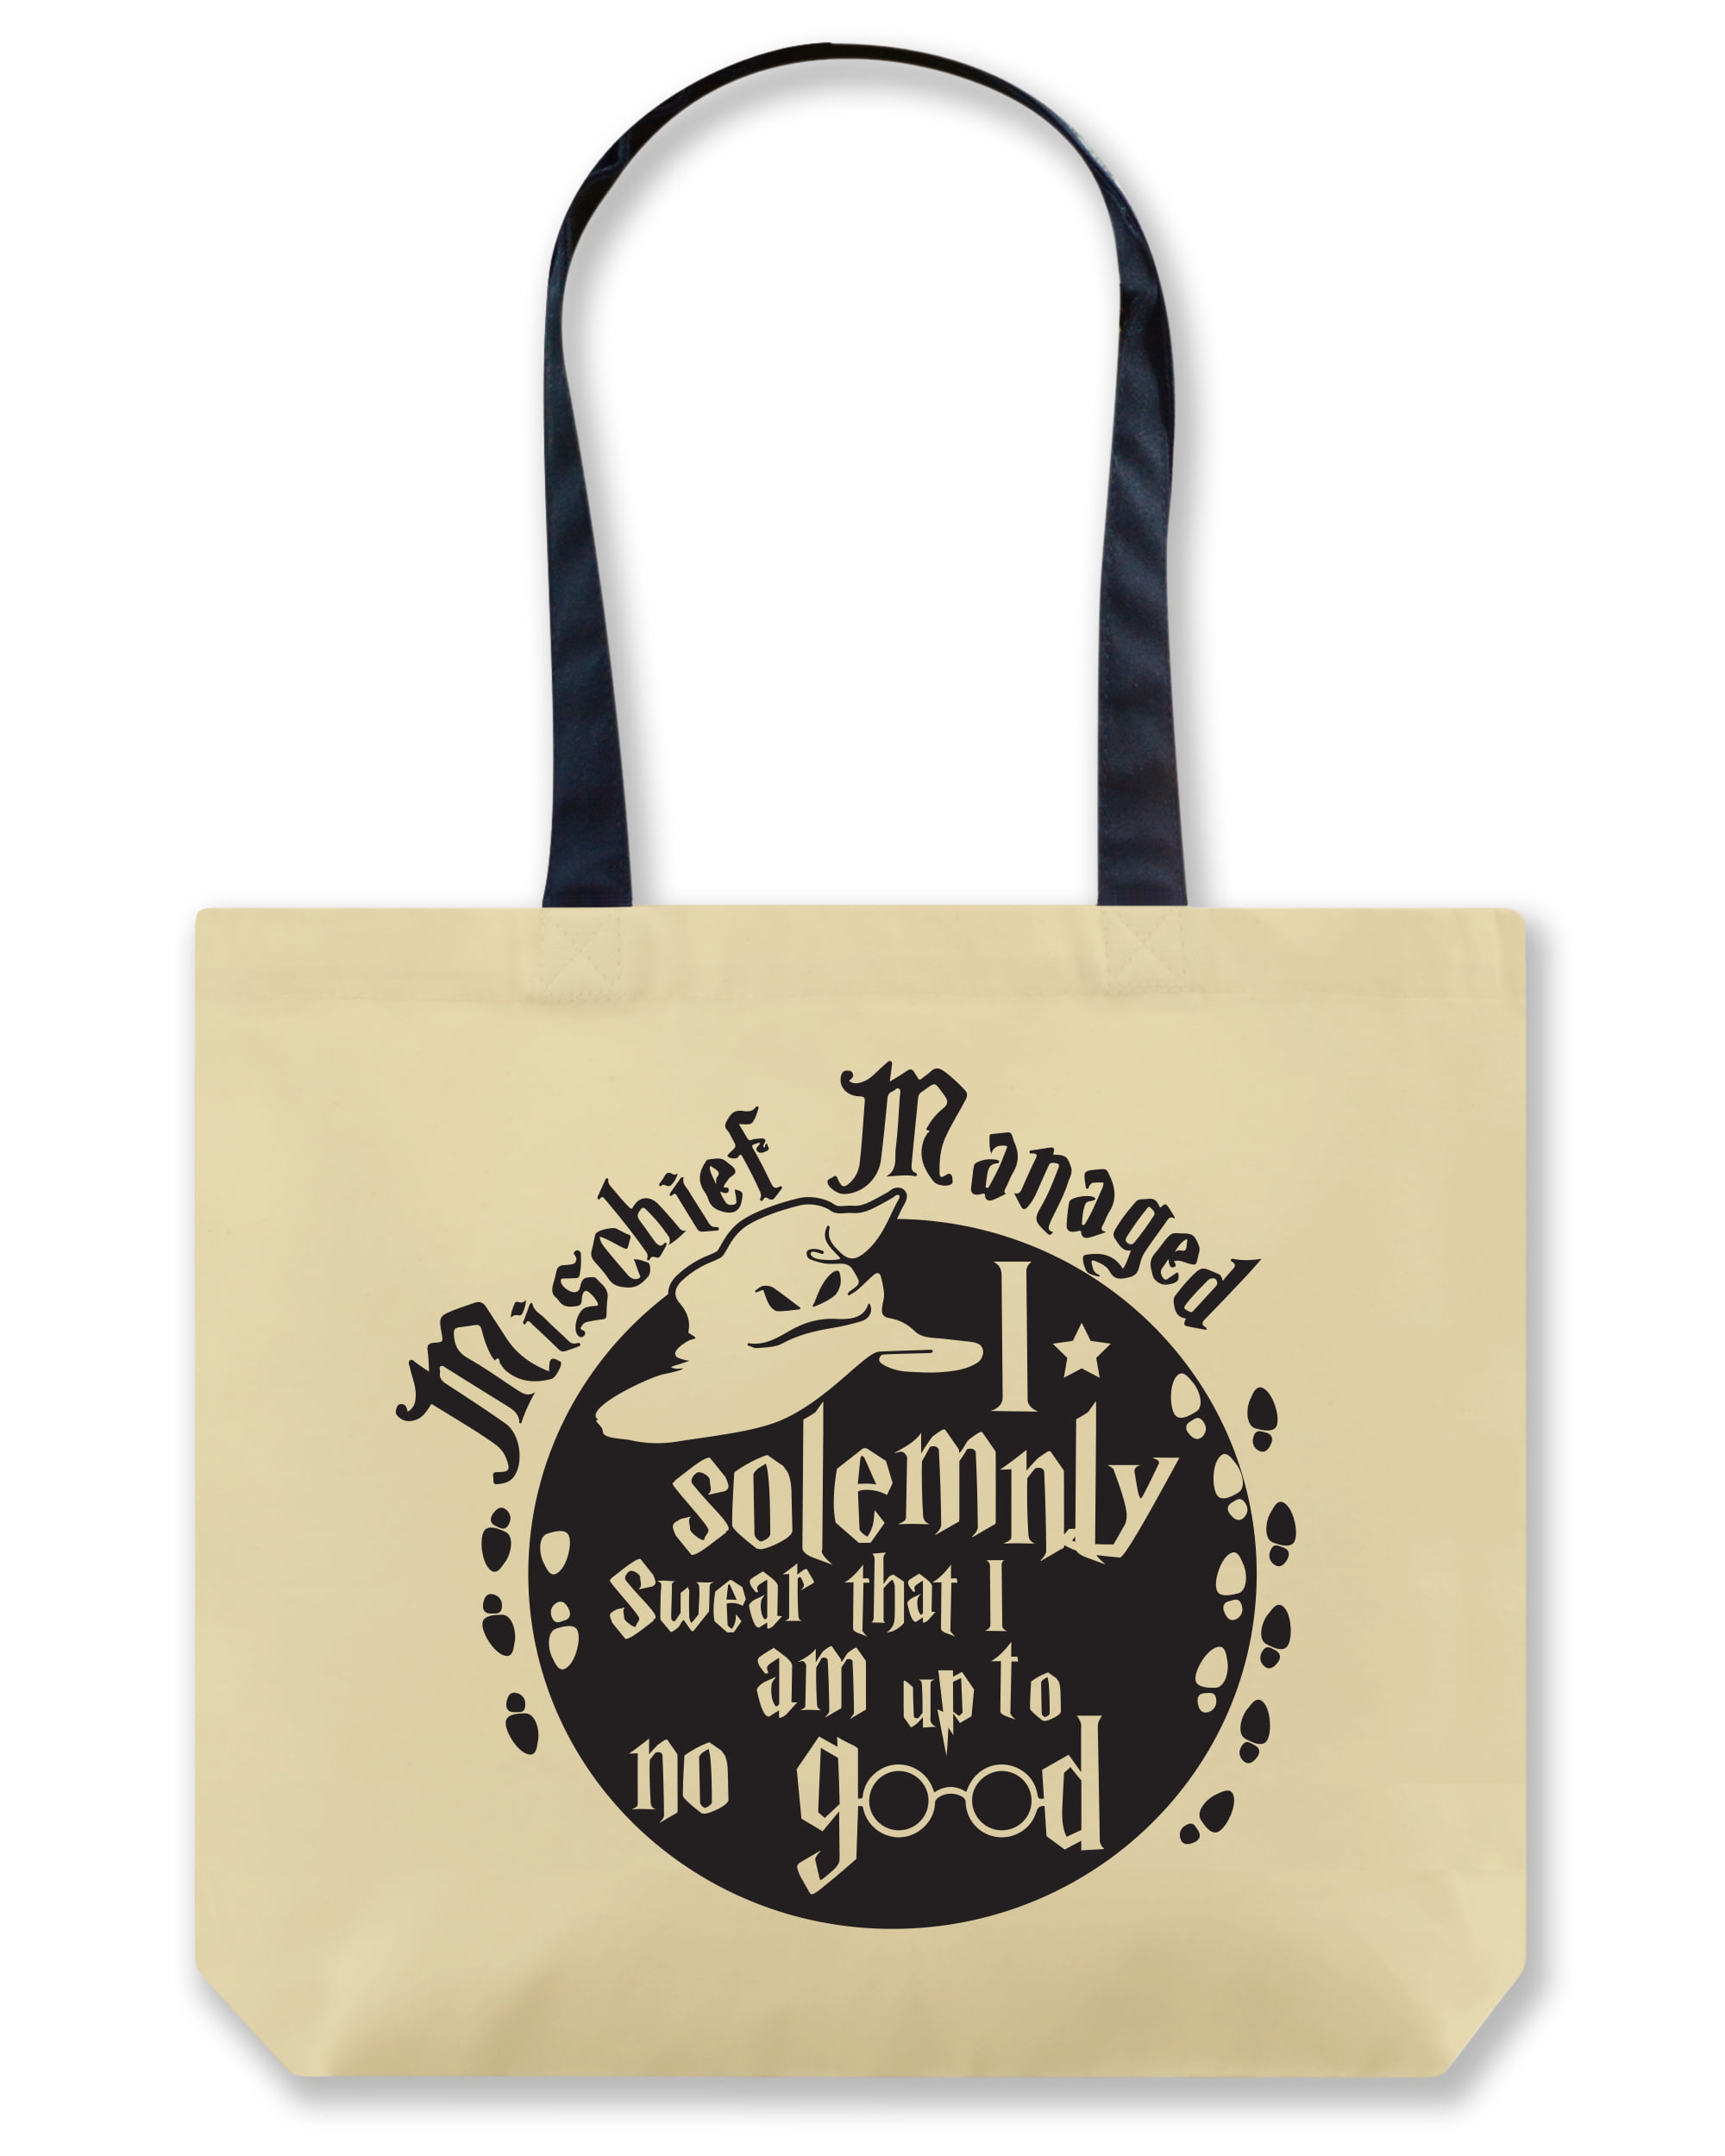 I Solemnly Swear That I Am Up To No Good Canvas Tote Bag Shopper Harry Potter 